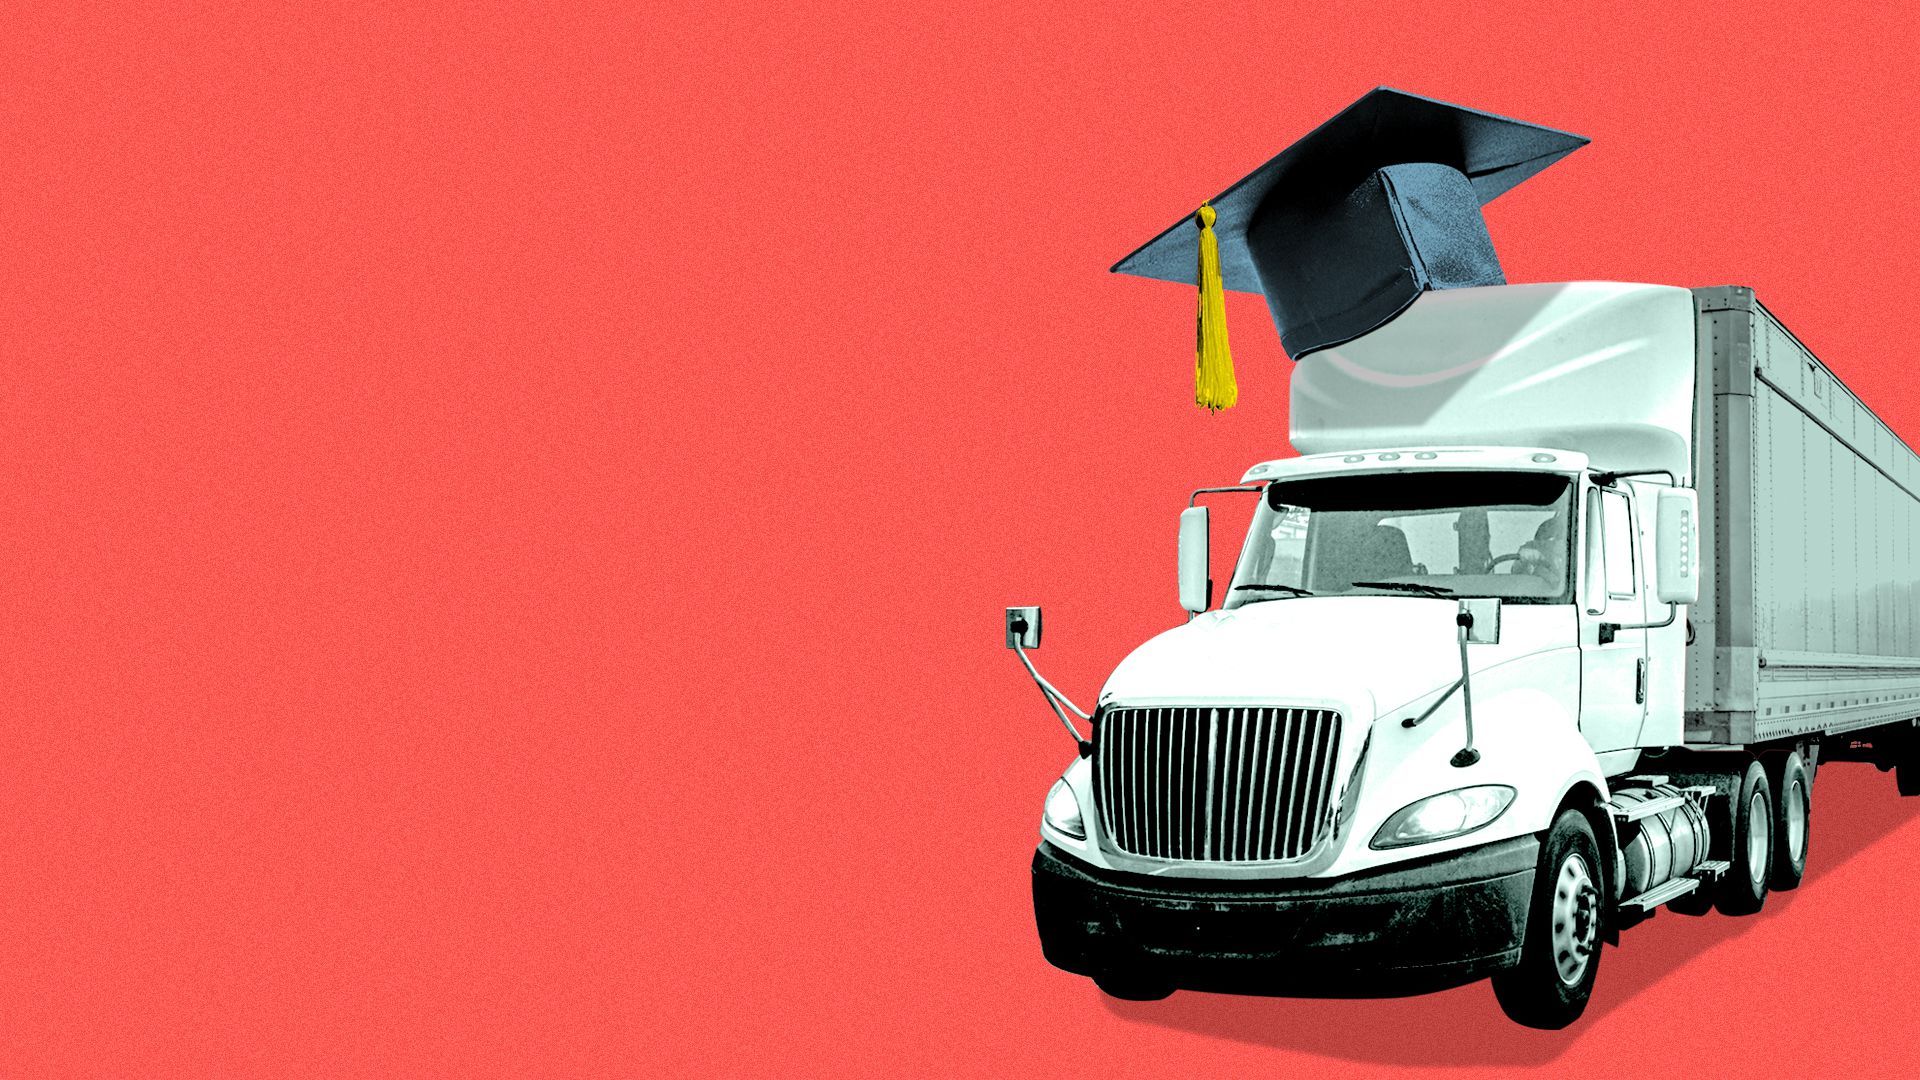 Illustration of a tractor trailer wearing a mortarboard.